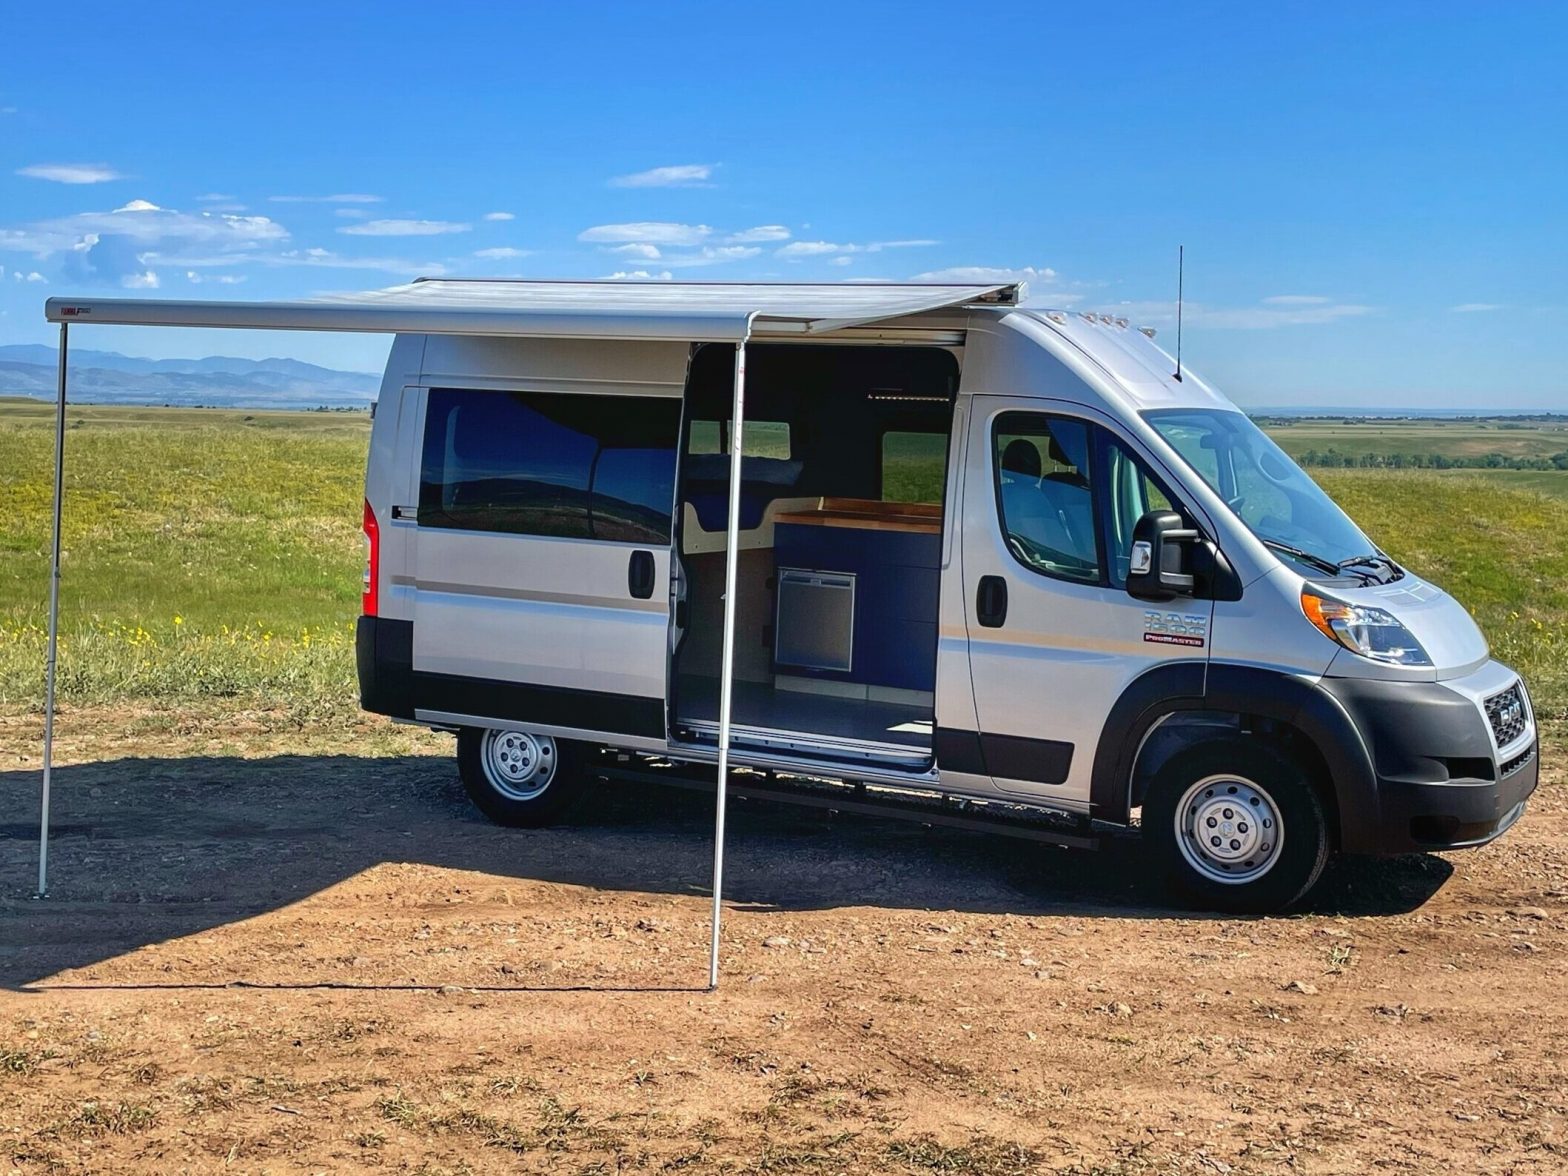 Take a Look Inside This Spacious and Comfortable ProMaster Camper Van